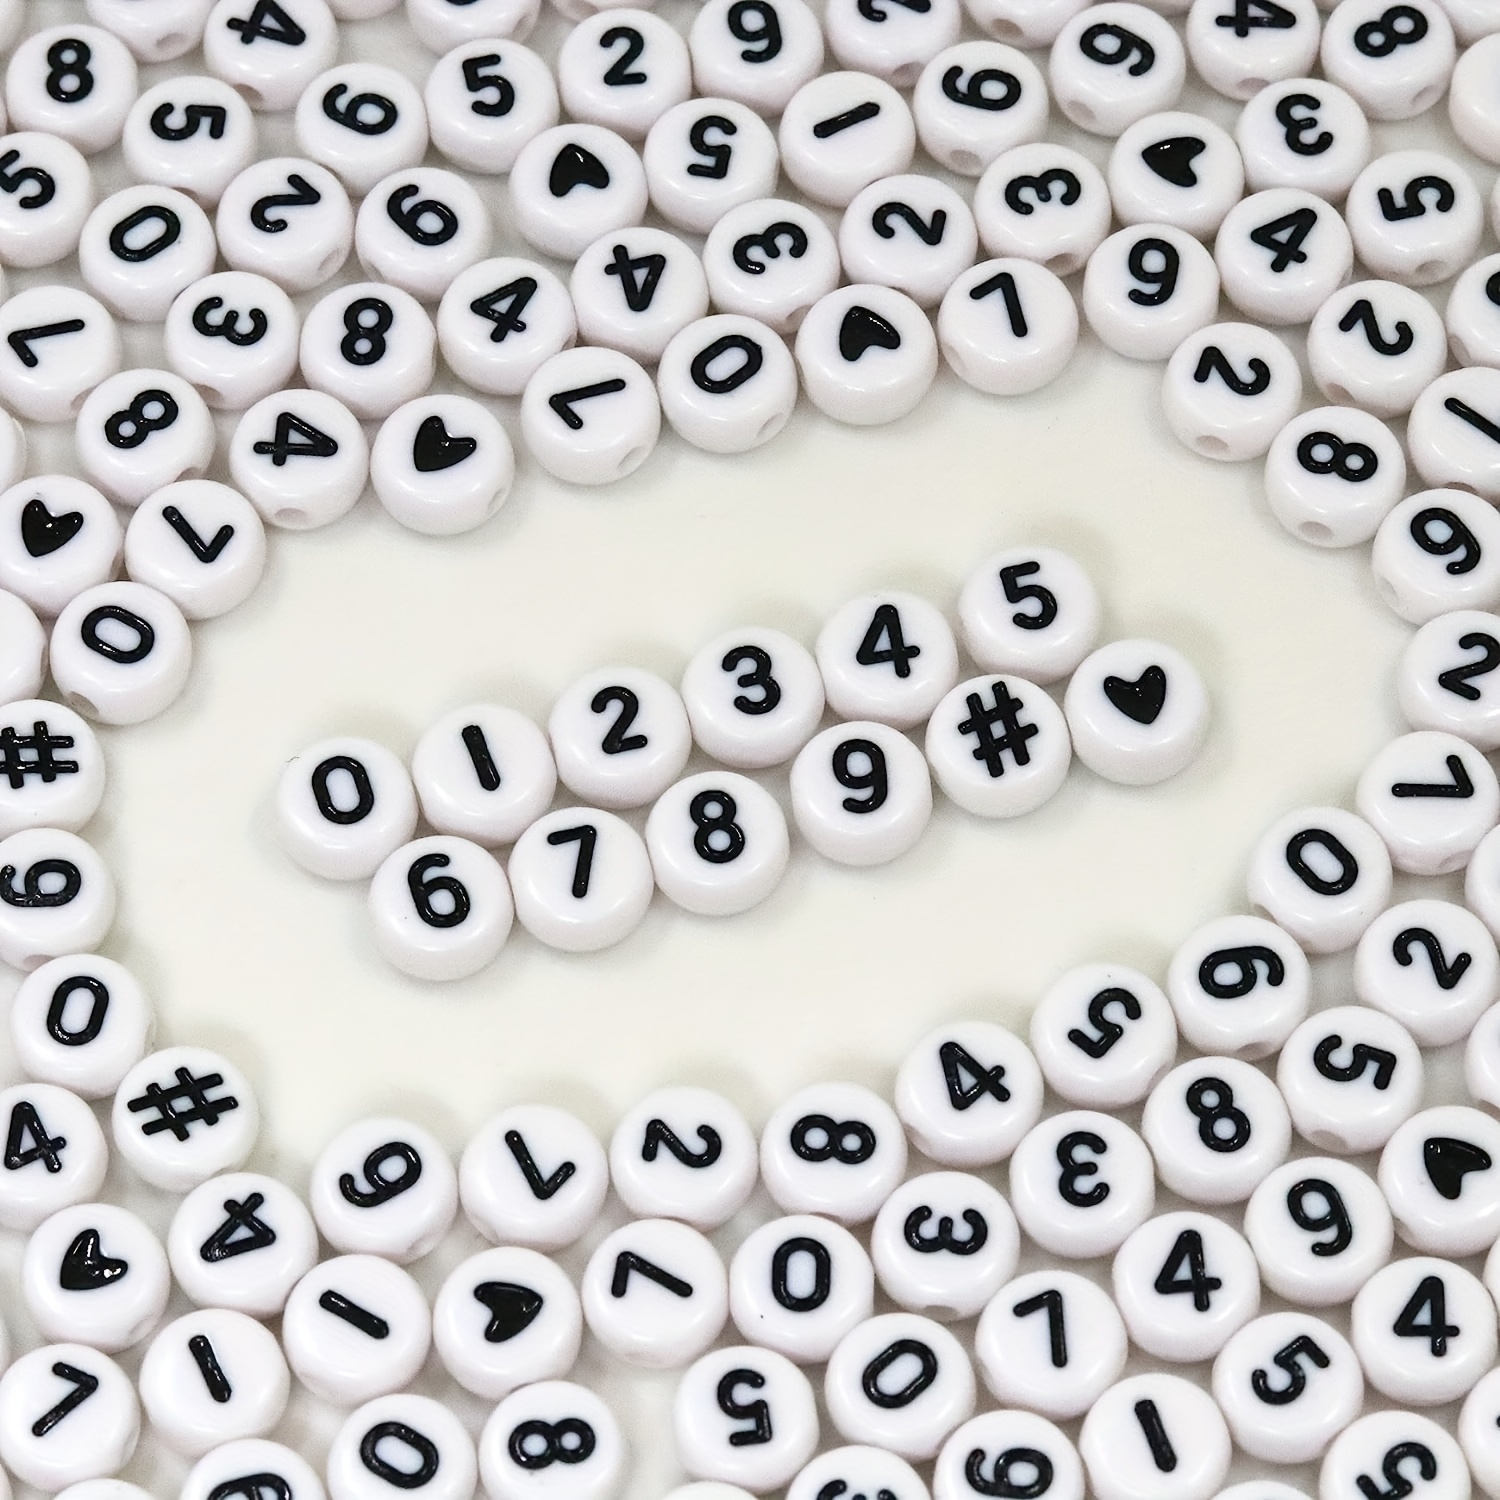 

1000pcs Acrylic Number Beads For Diy Necklaces Key Chains Bracelets (4x7 Round, White) Send A Roll Of Thread For Small Business Jewelry Making Supplies